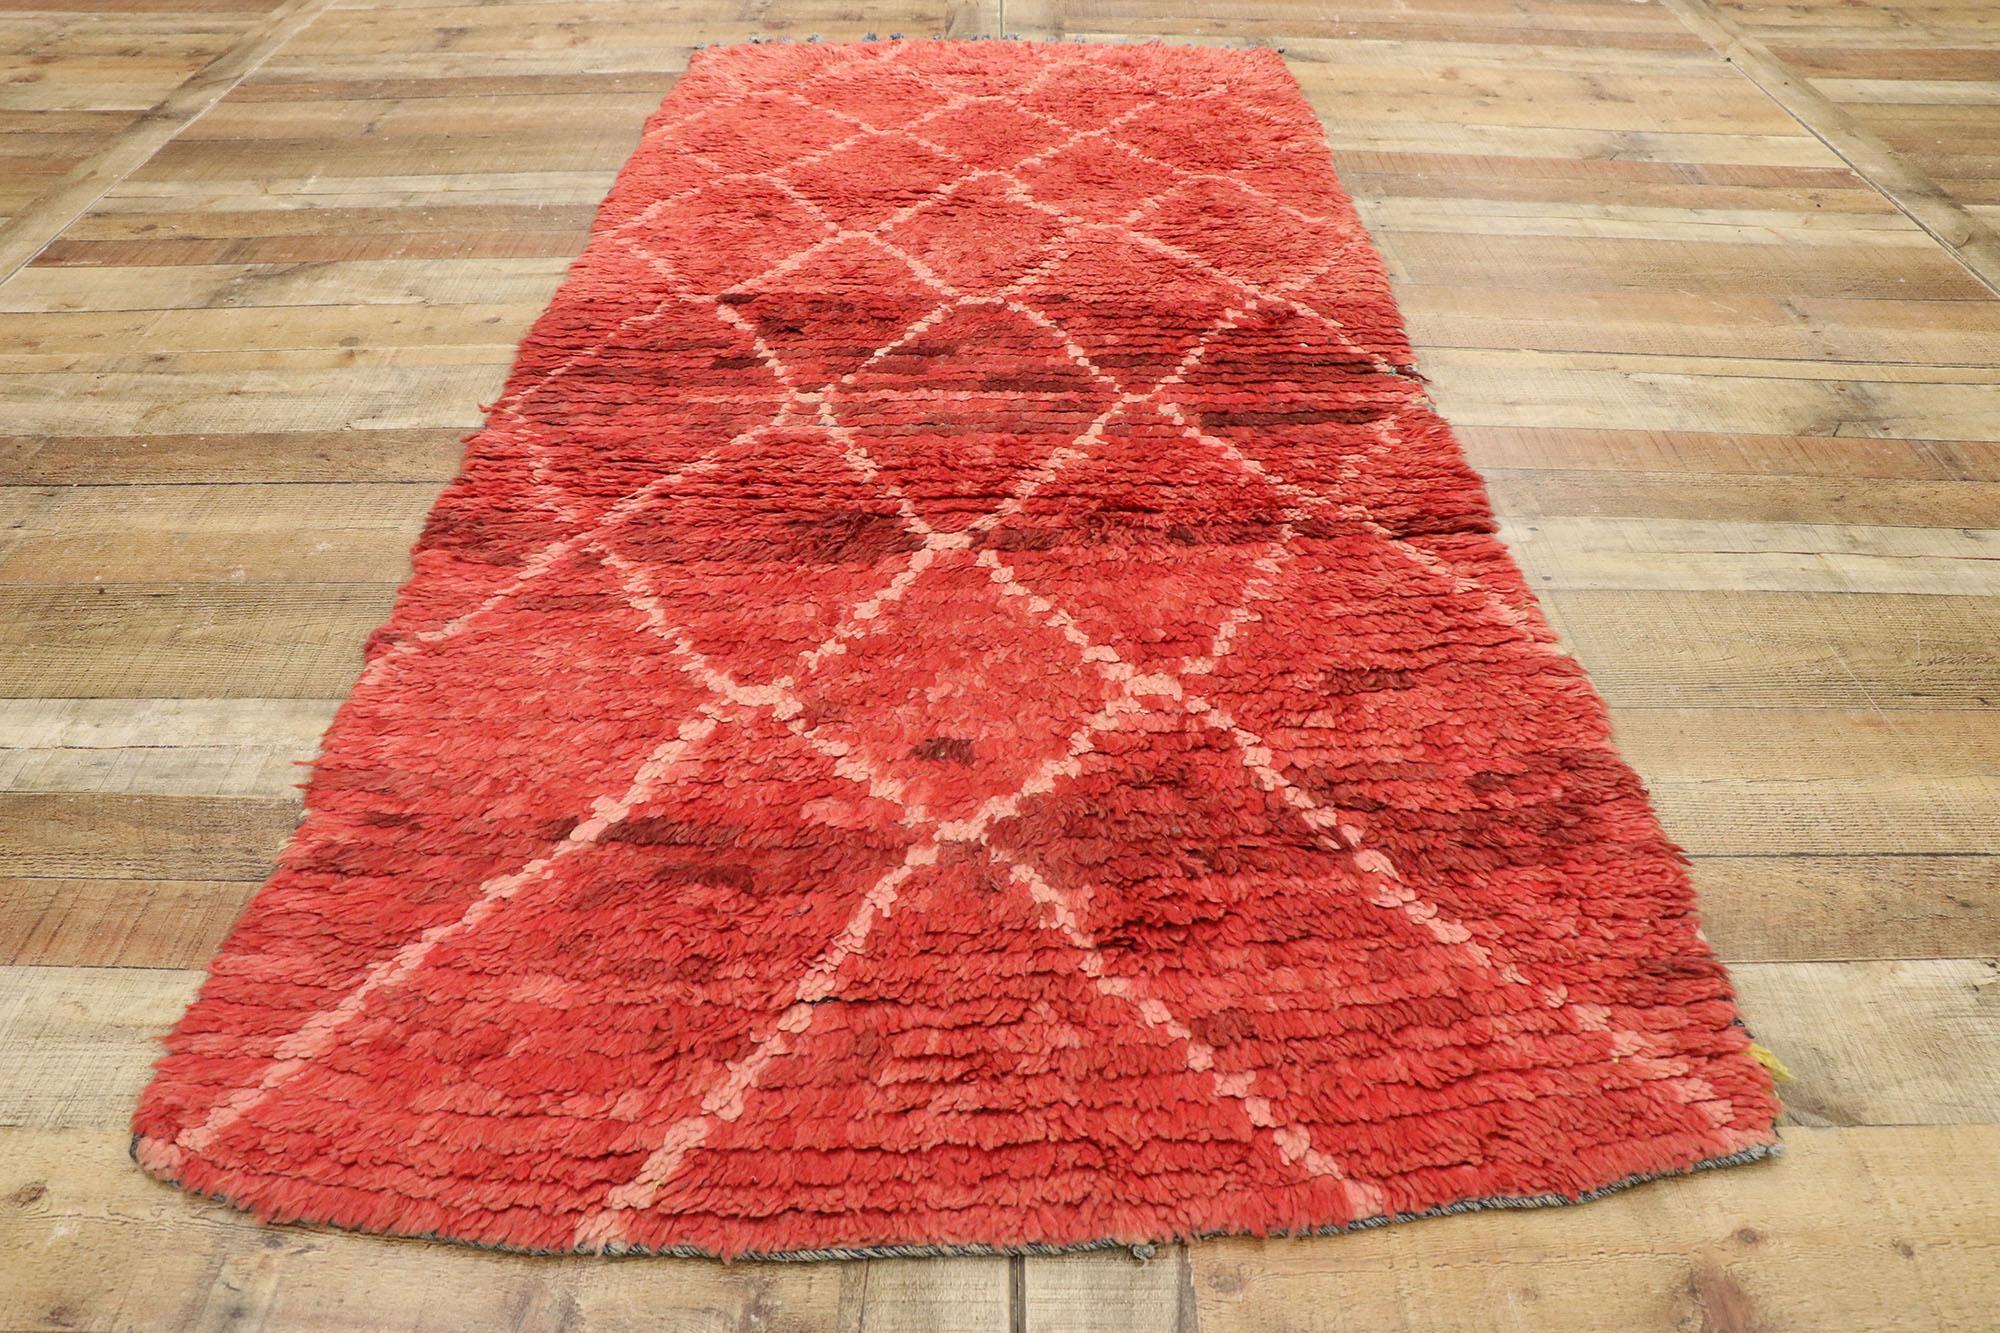 20th Century Vintage Berber Moroccan Runner with Tribal Style, Red Shag Hallway Runner